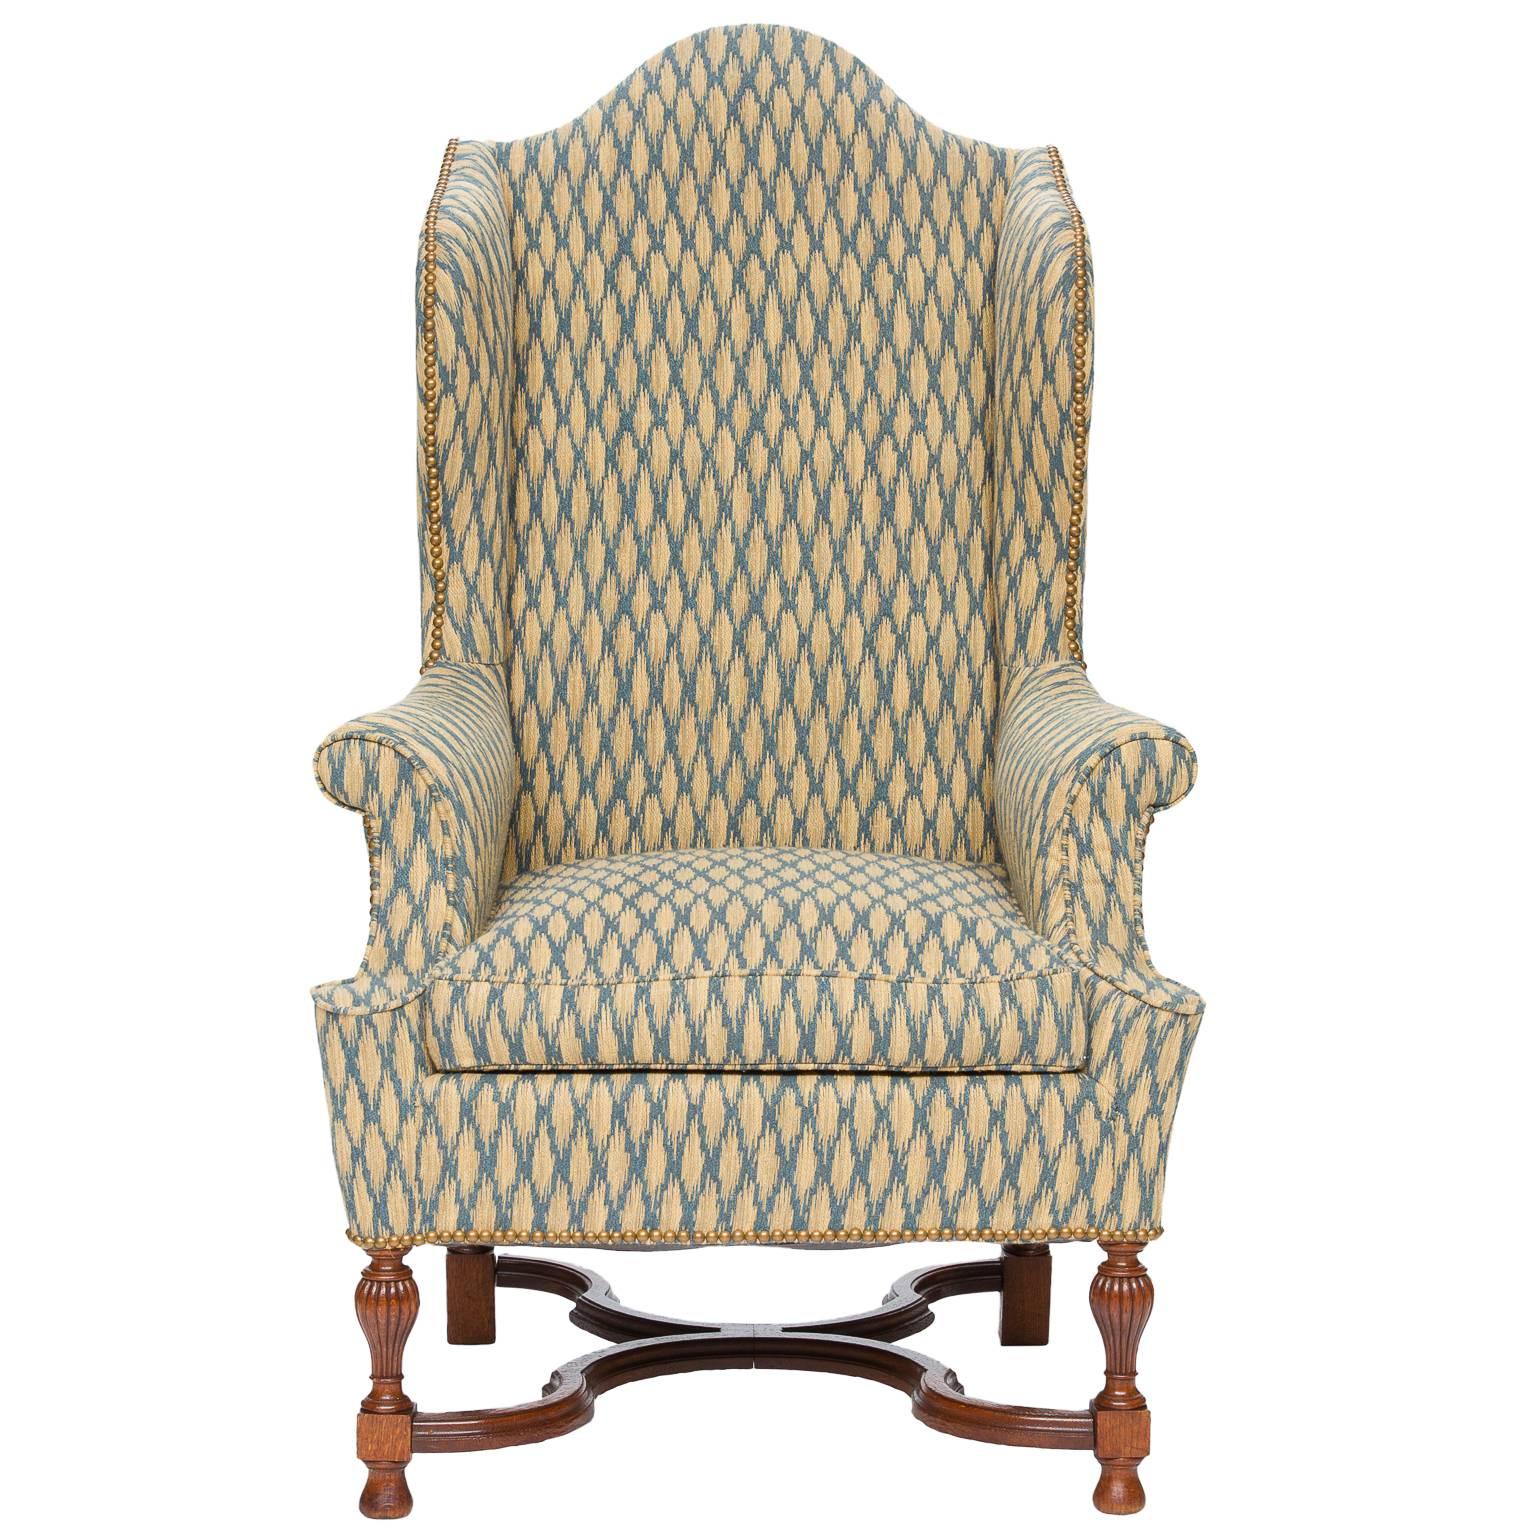 An antique reupholstered oak wingback armchair with X-stretcher and reeded cup legs. Very nice condition and a solid heavy chair. Ready for the home.